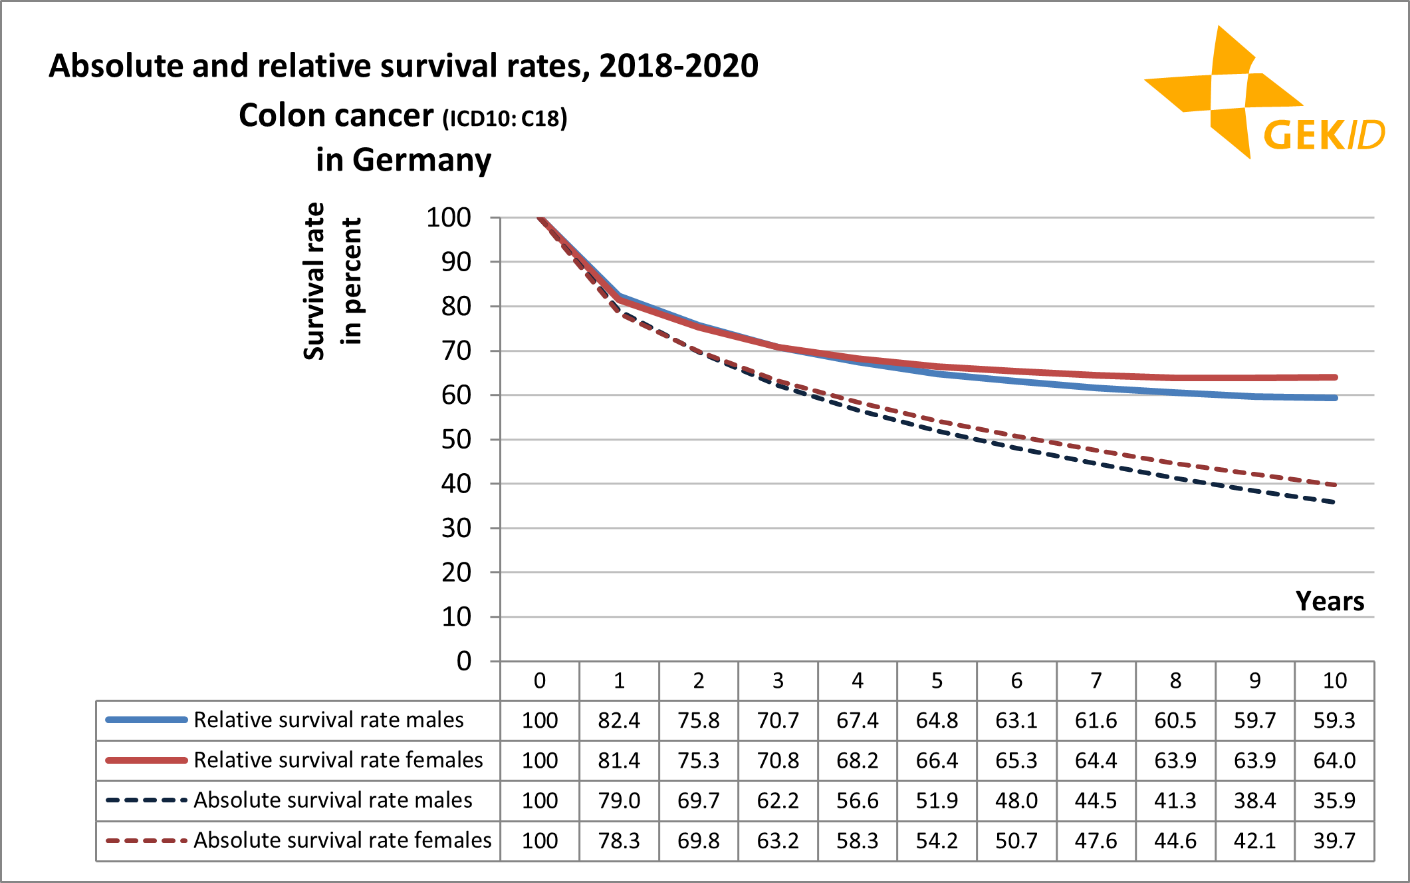 Absolute and relative survival rates for malignant neoplasms of the colon and rectum (ICD 10: C18-C20